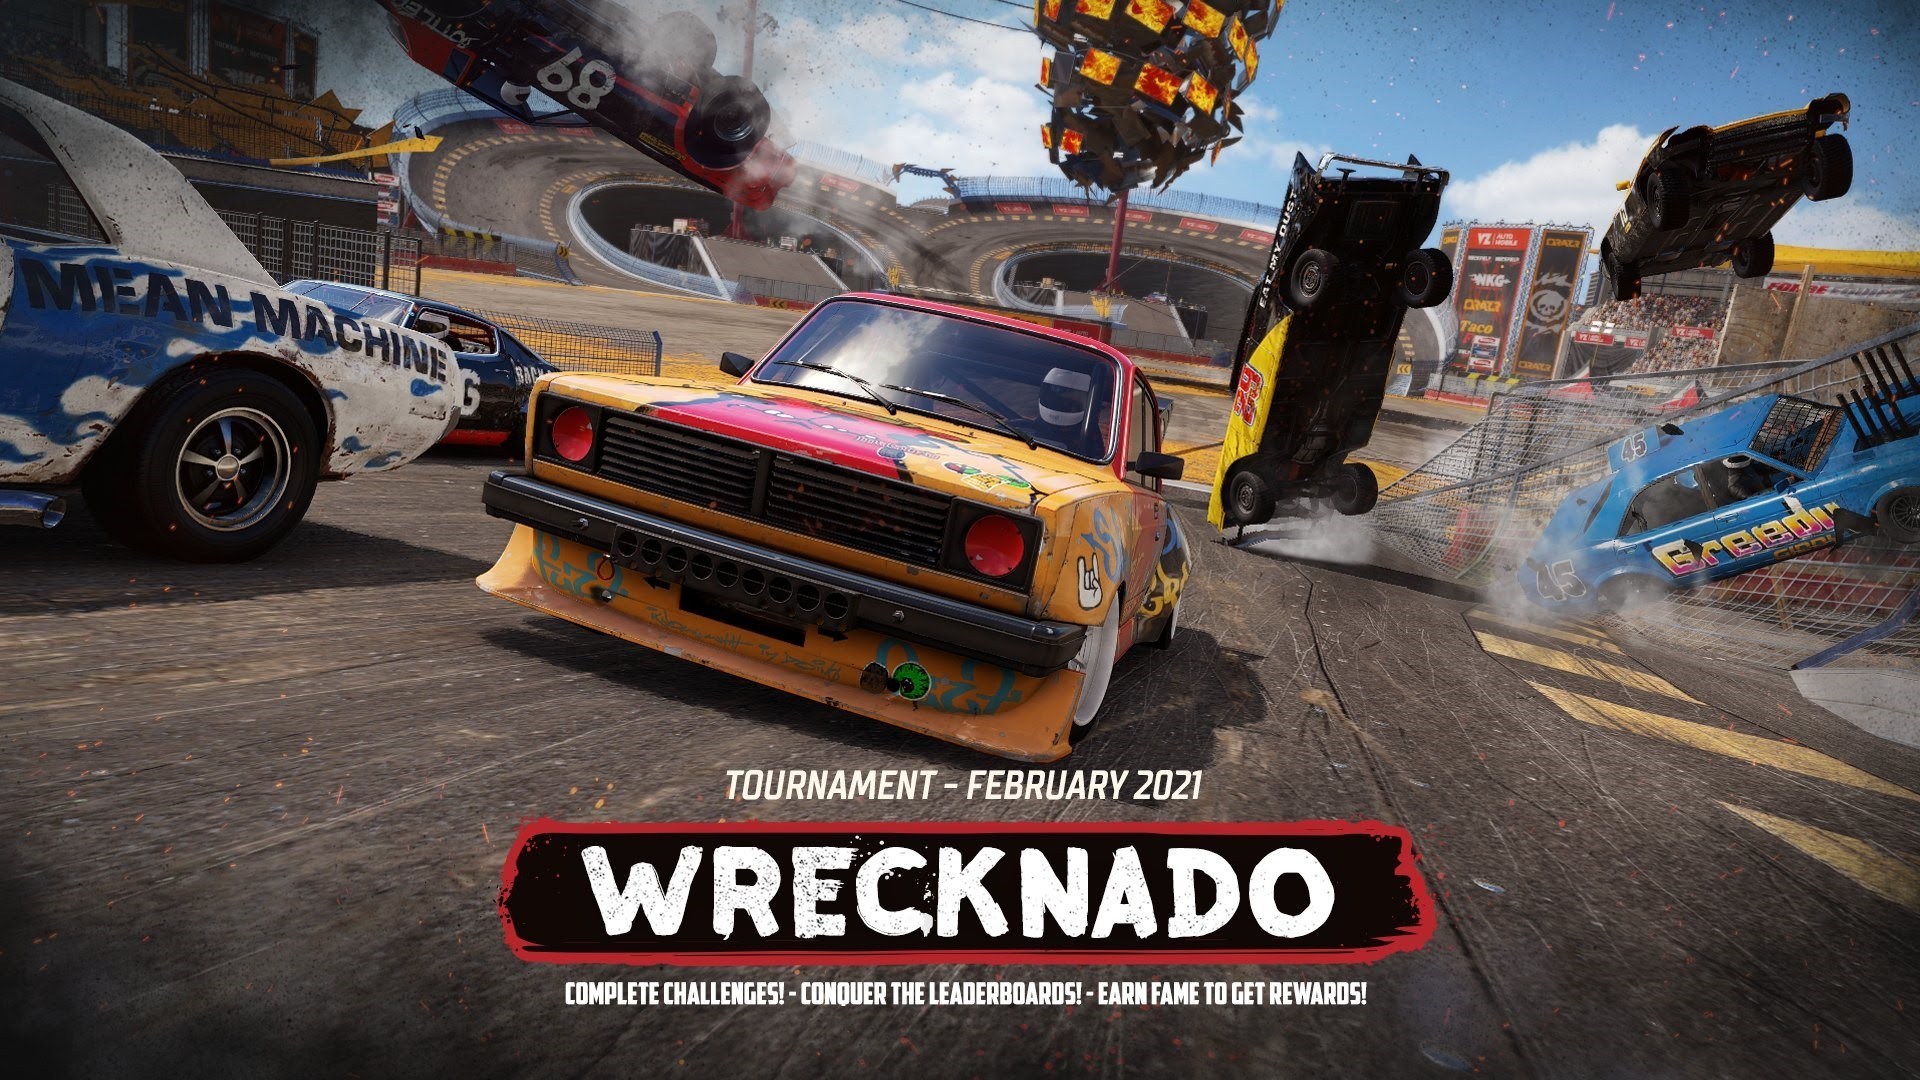 Wrecknado Warning: New Tournament and Car Pack For Wreckfest Out Now